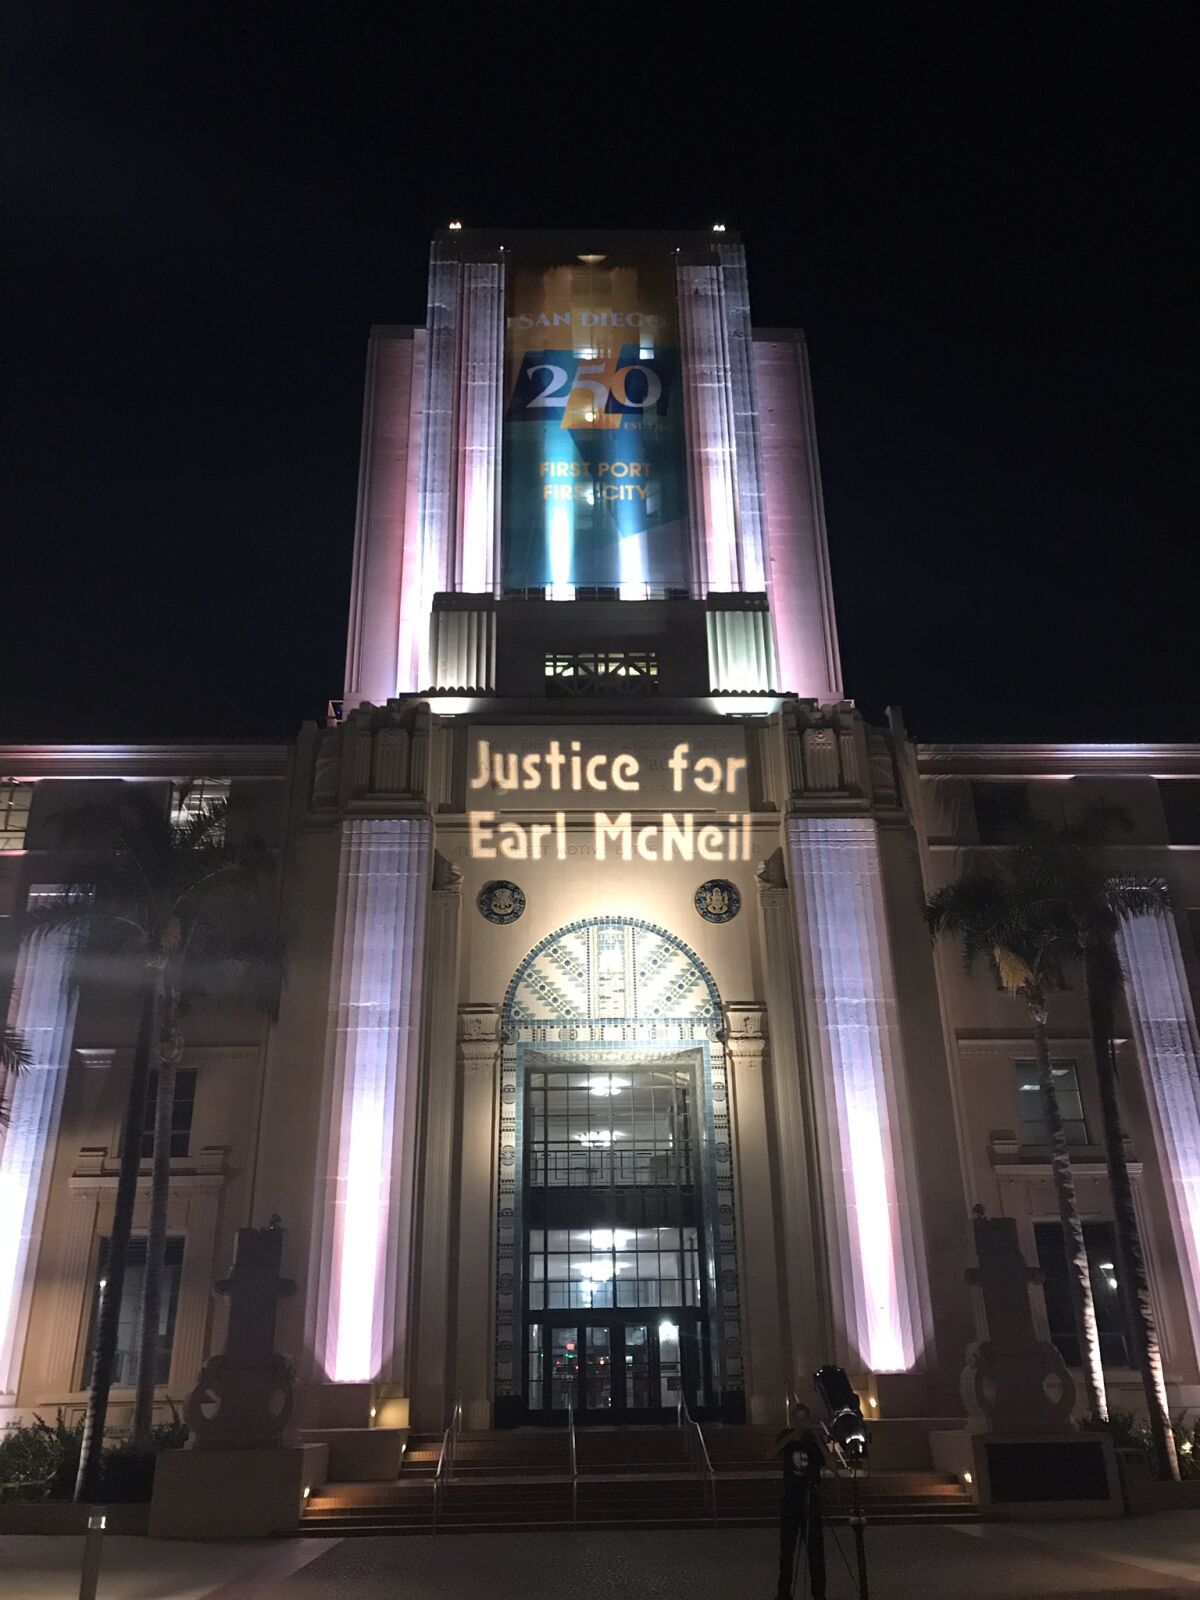 Activists projected "Justice for Earl McNeil" onto San Diego County Administration Center in Oct. 2019 while CLERB met inside